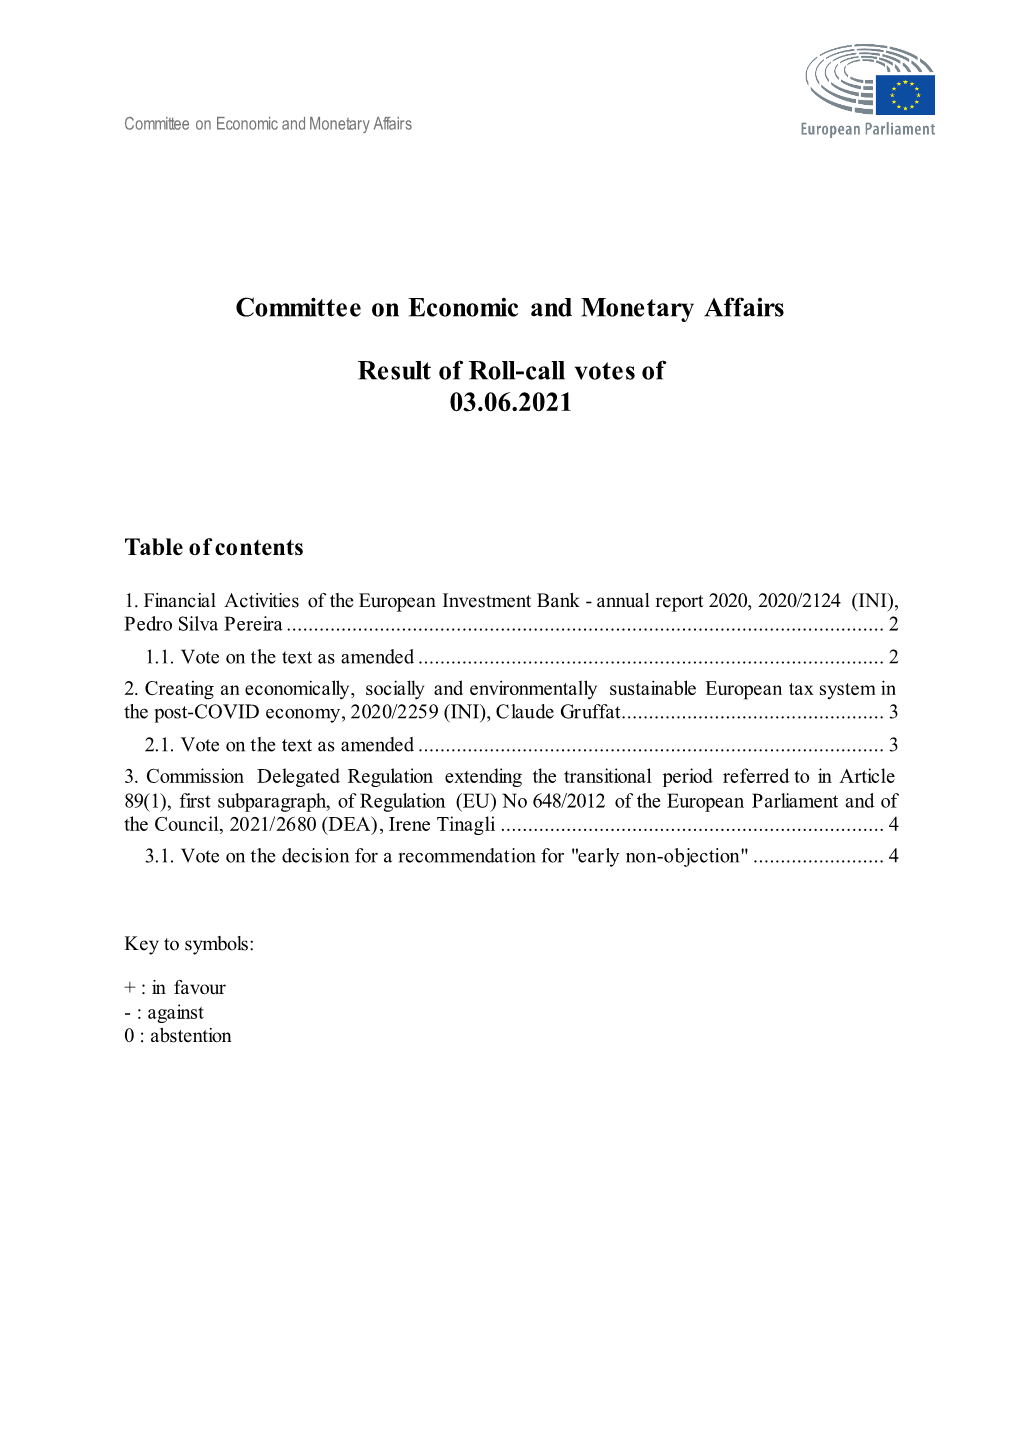 Committee on Economic and Monetary Affairs Result of Roll-Call